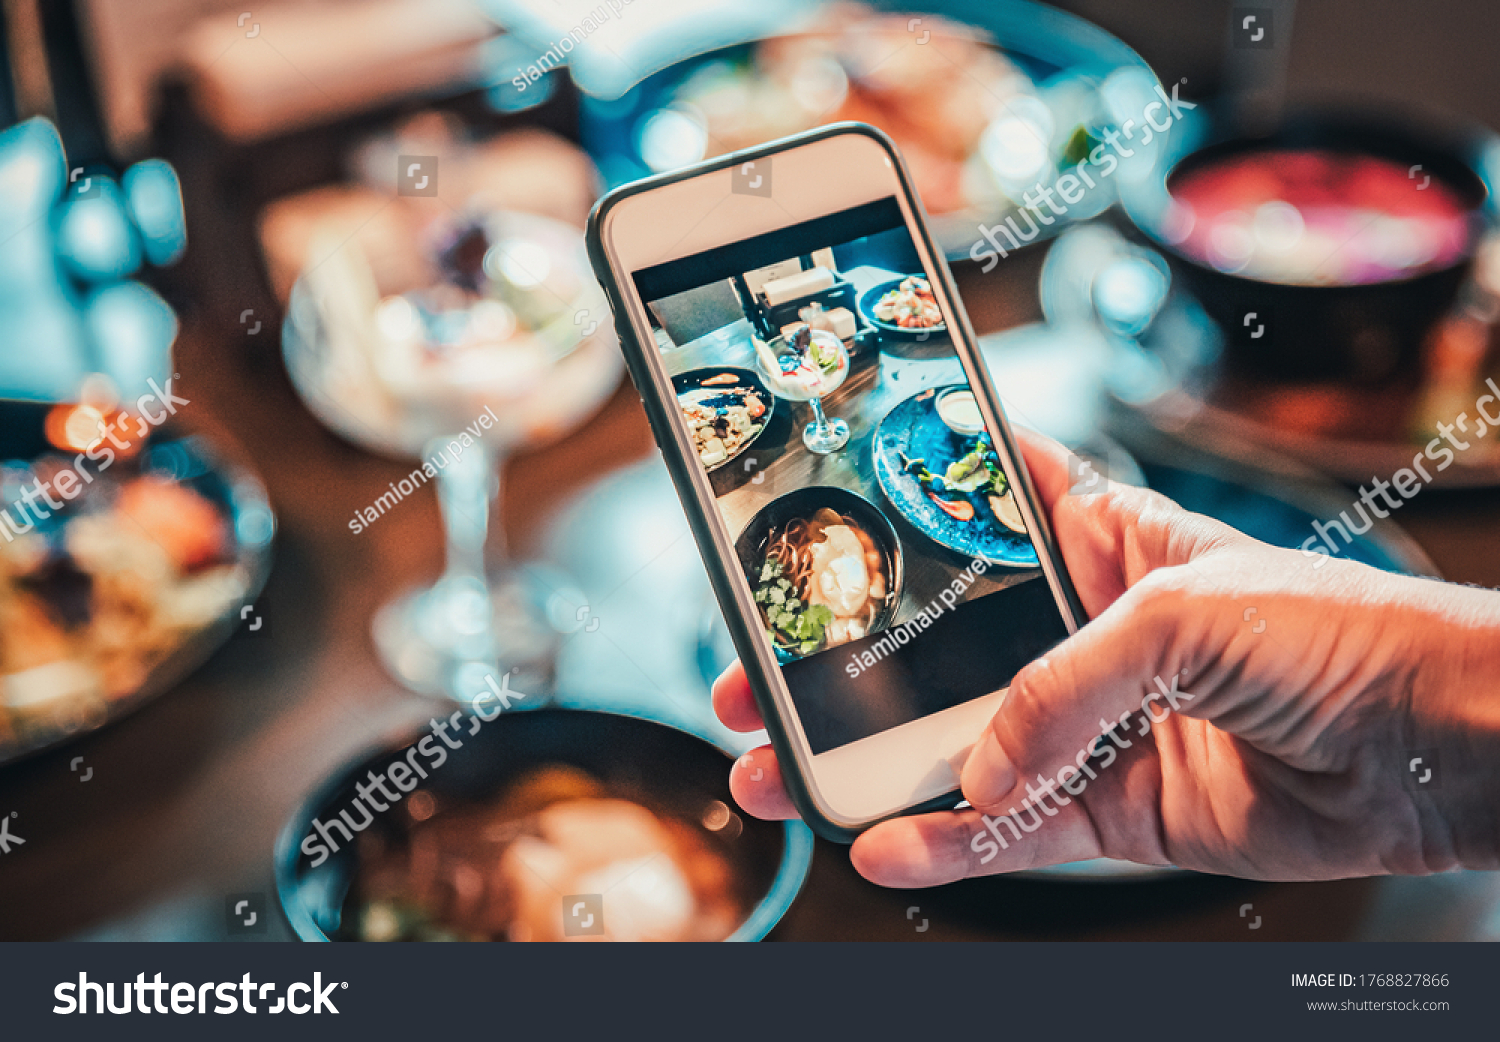 woman hand with smartphone photographing food at restaurant or cafe #1768827866